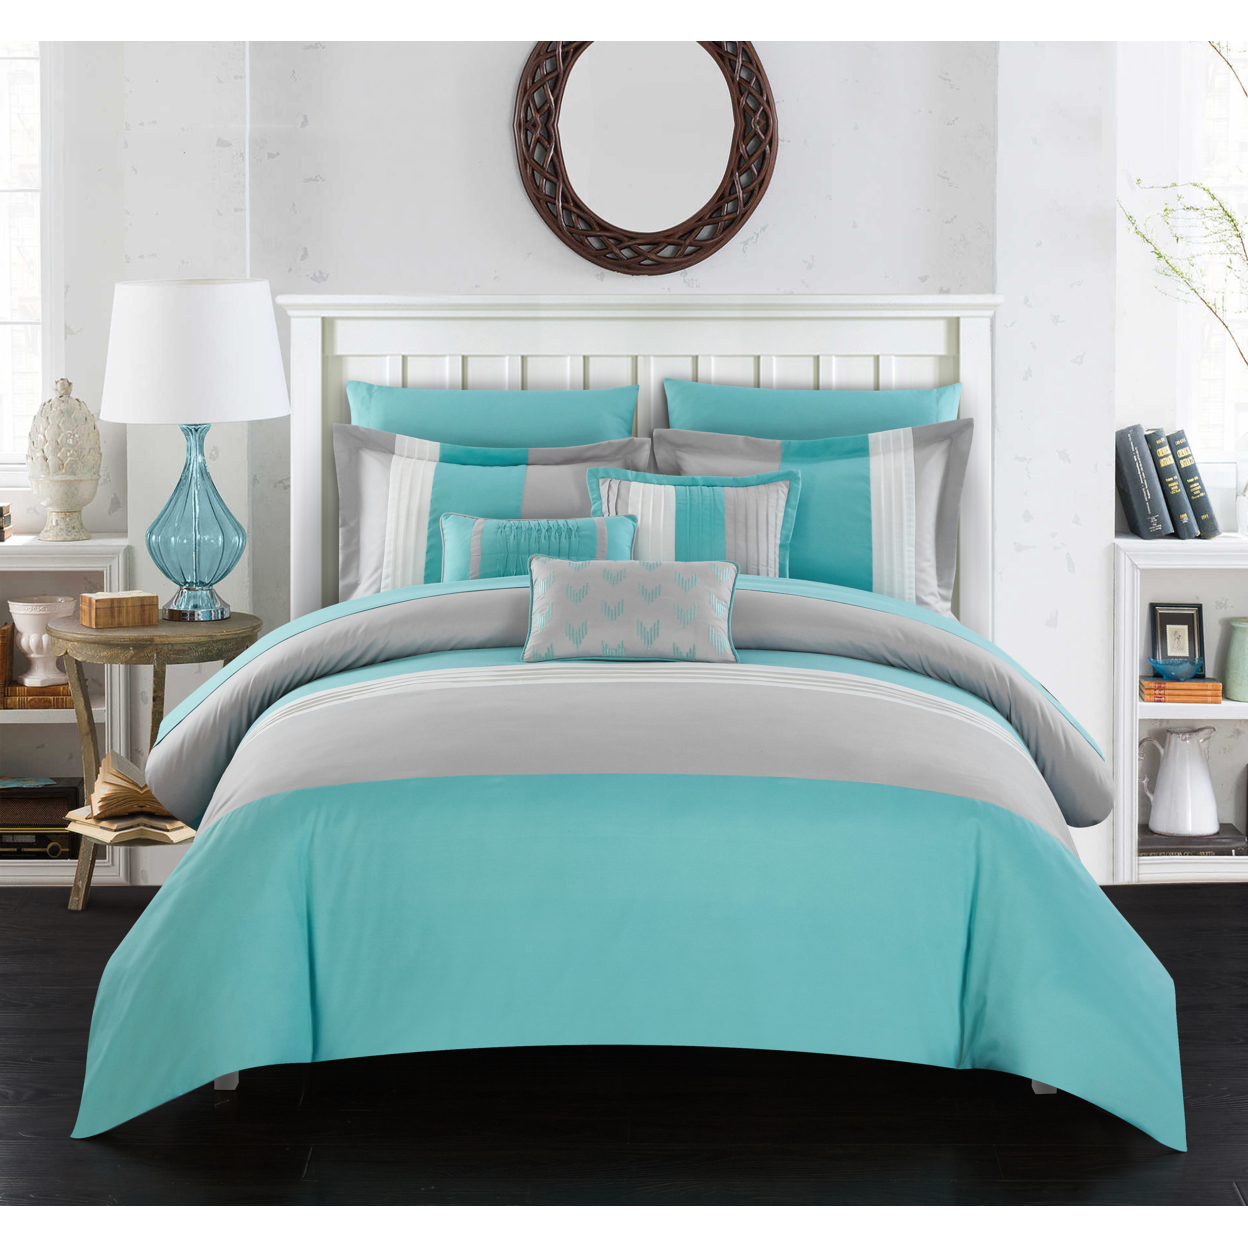 Rashi 10 Or 8 Piece Color Block Bed In A Bag Bedding And Comforter Set - Turquoise, Queen